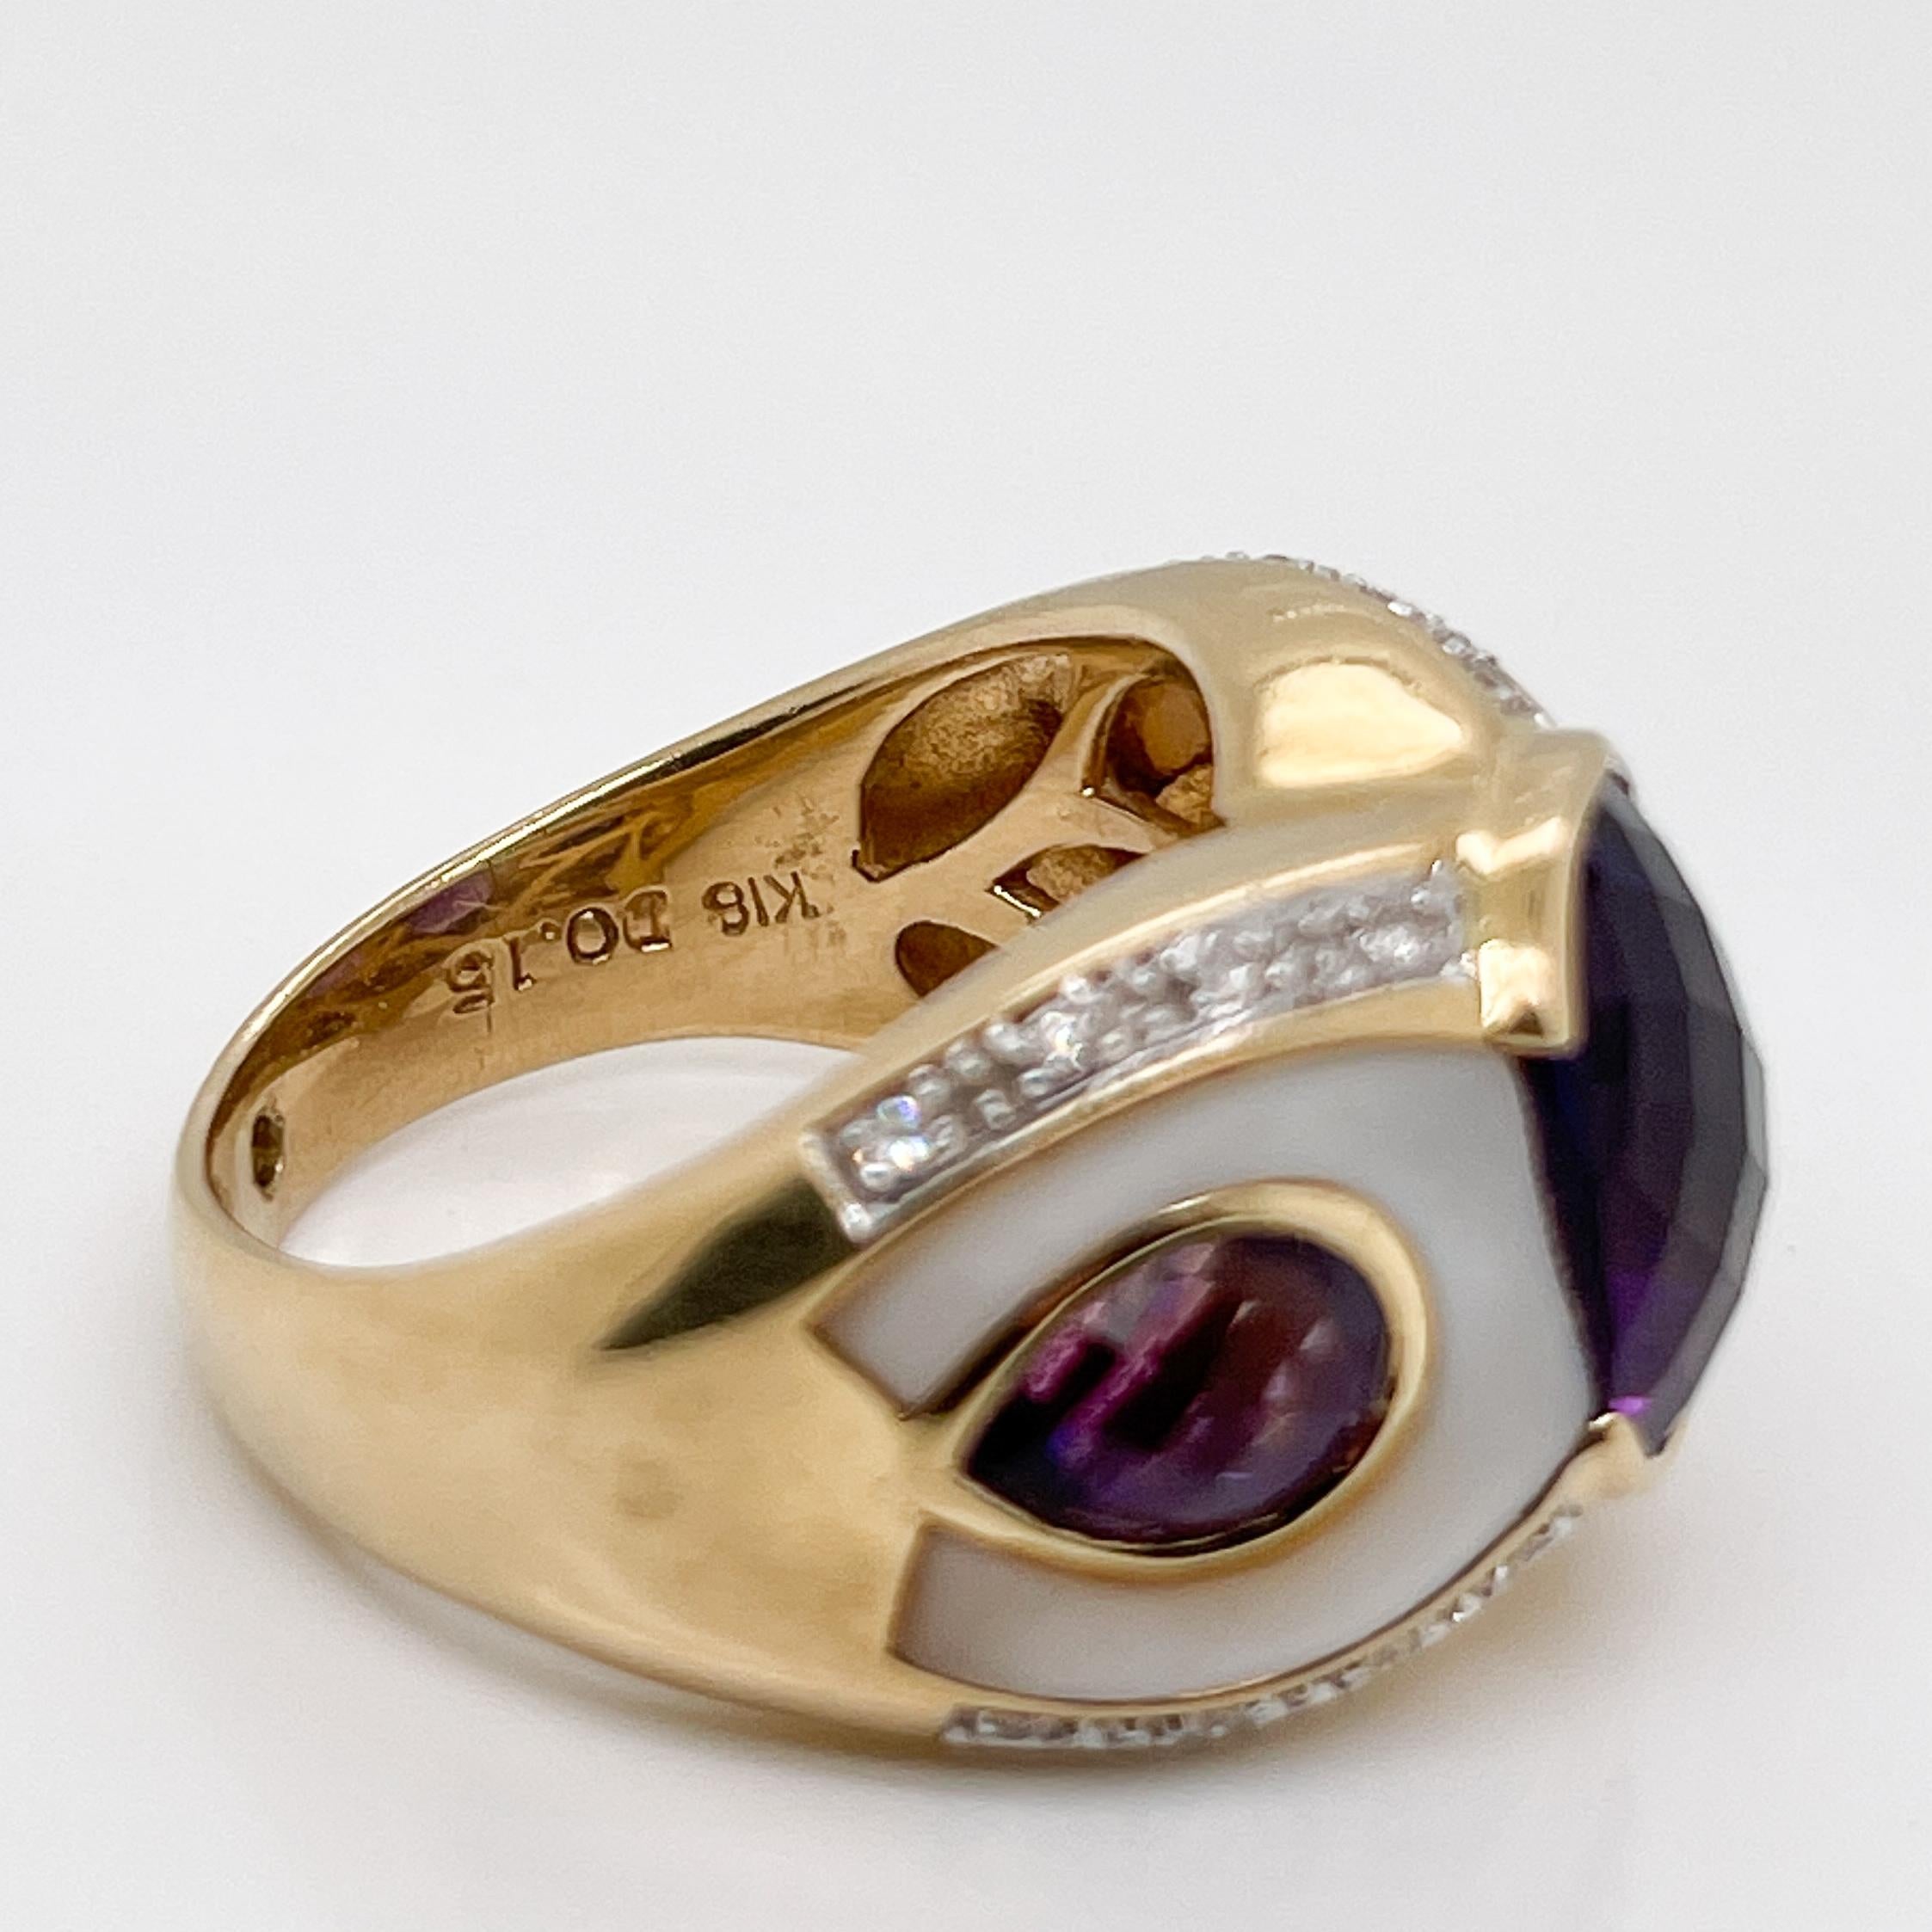 Owl/Parrot Bird Cocktail Ring in 18k Gold, Mother of Pearl, Diamond & Amethyst For Sale 4